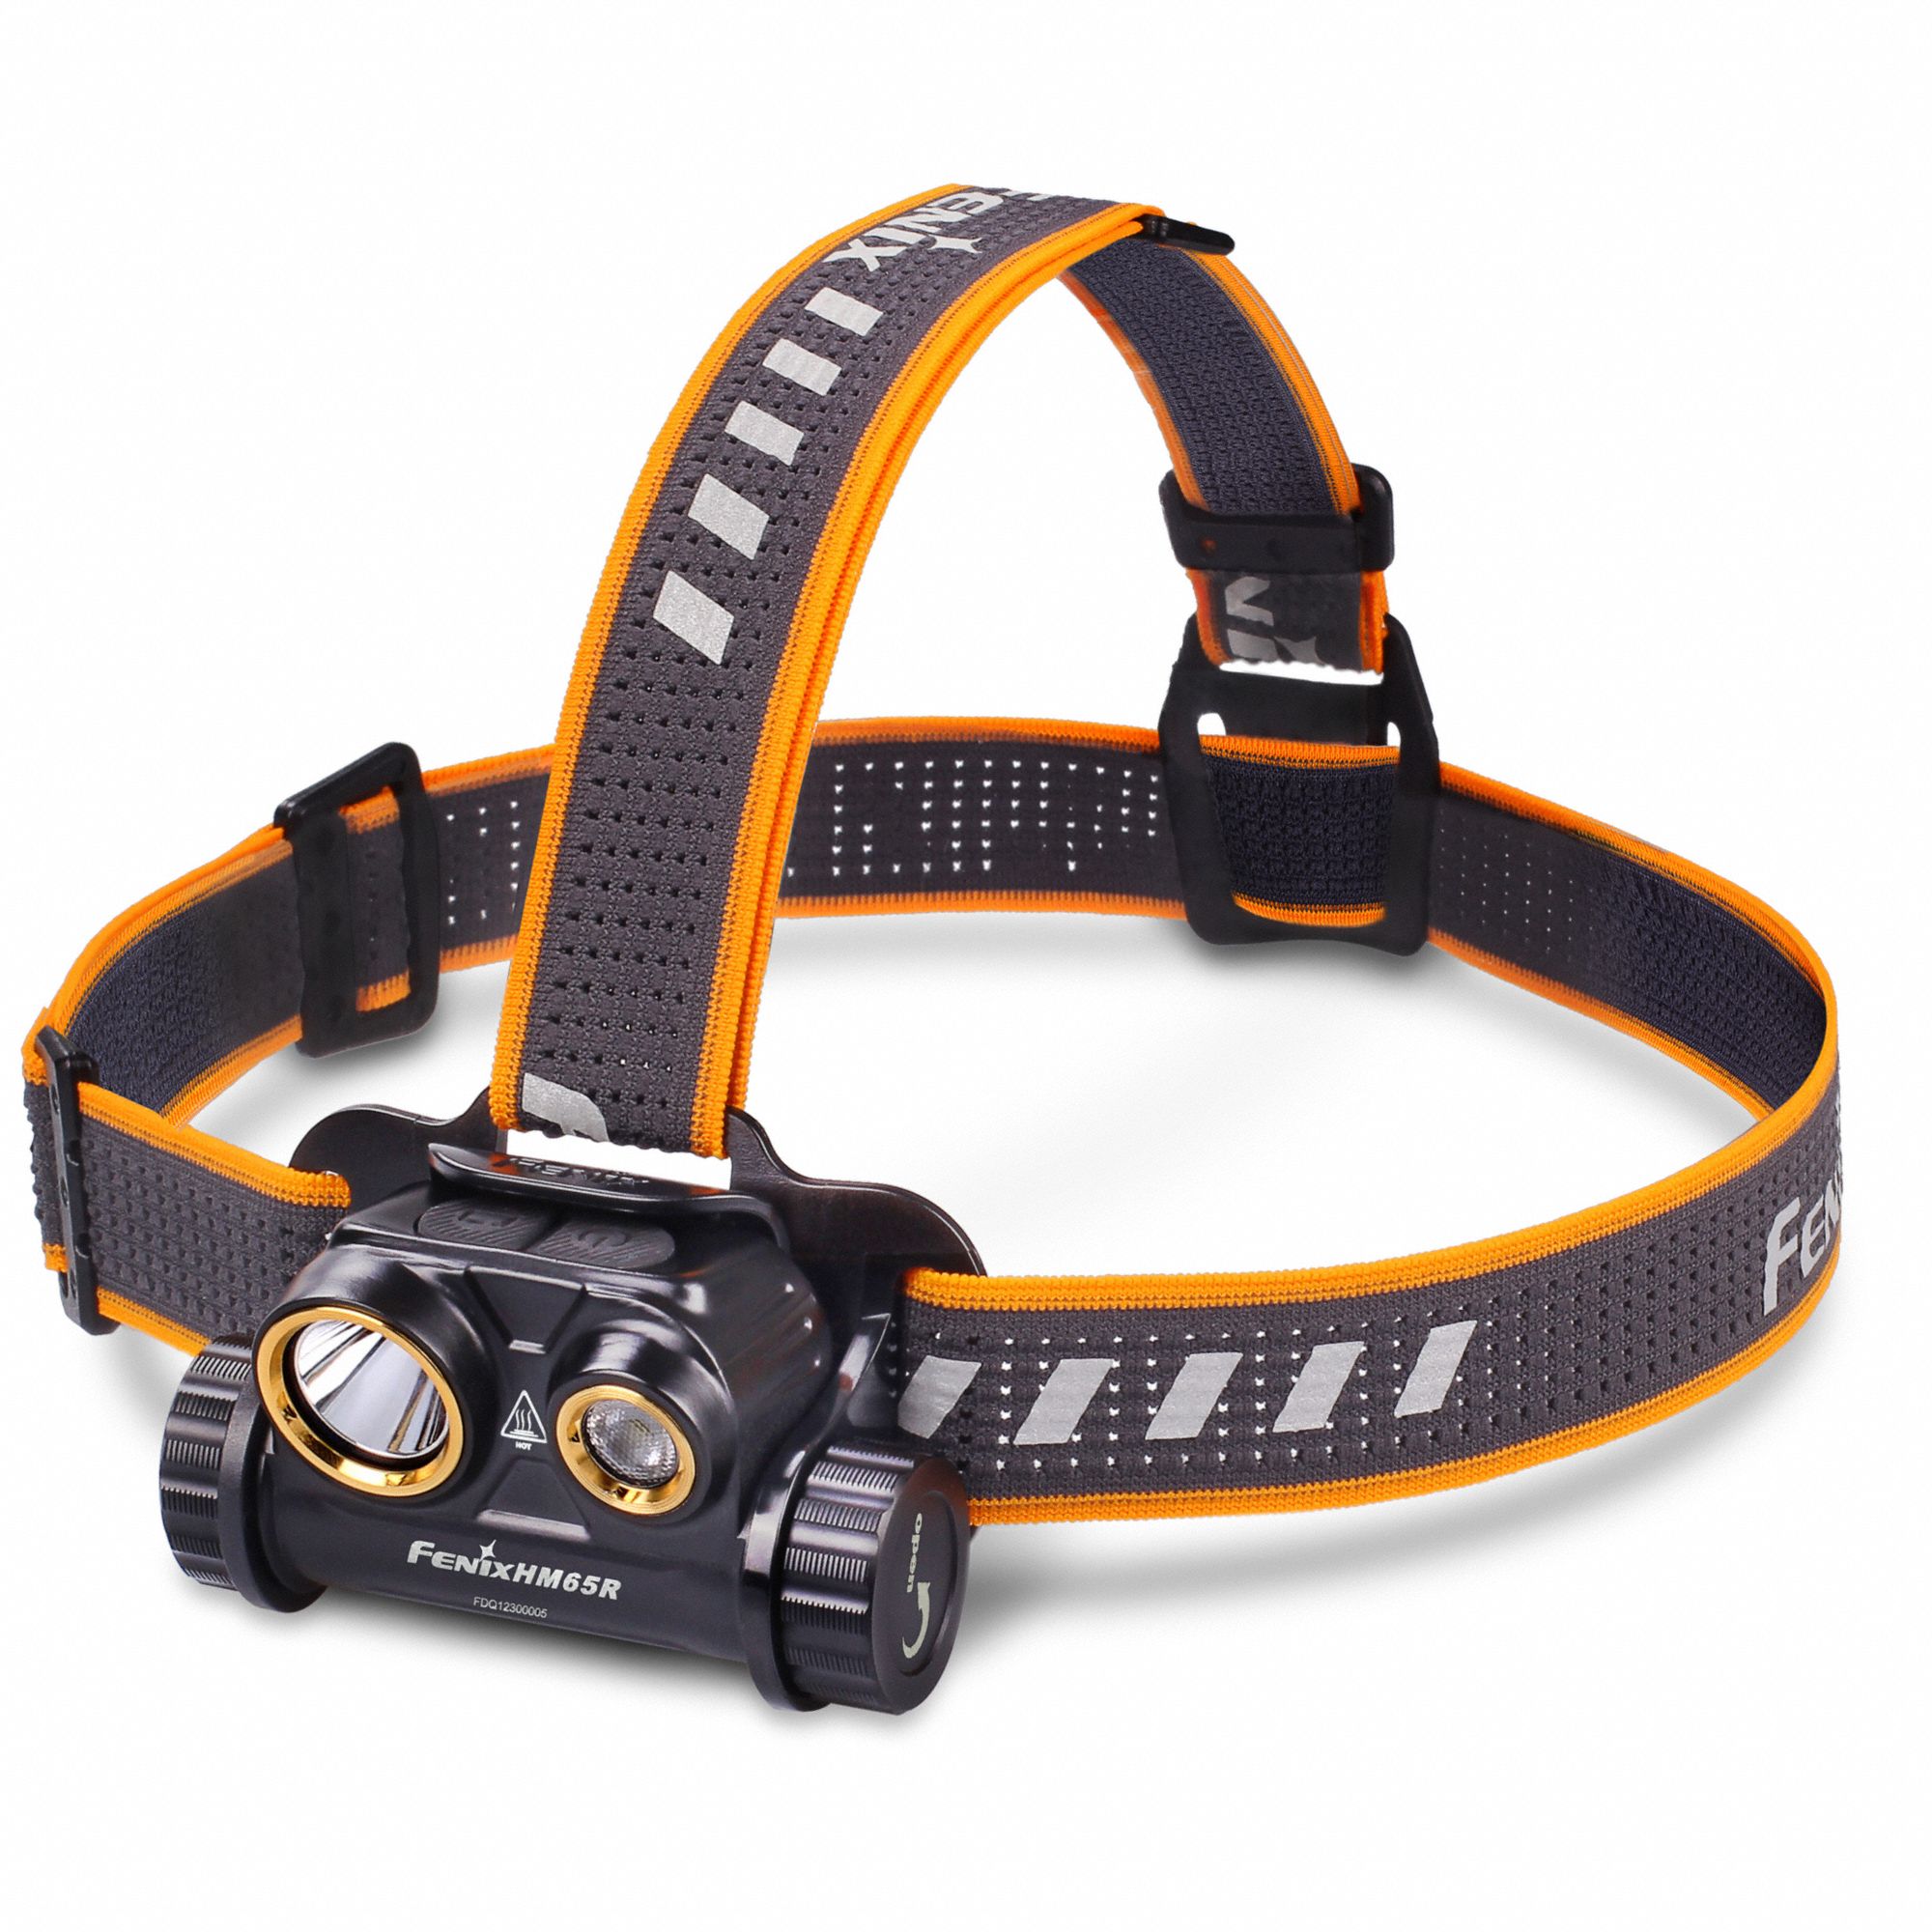 Rechargeable Headlamp: 1,000 lm Max Brightness, 280 hr Max Run Time, Black